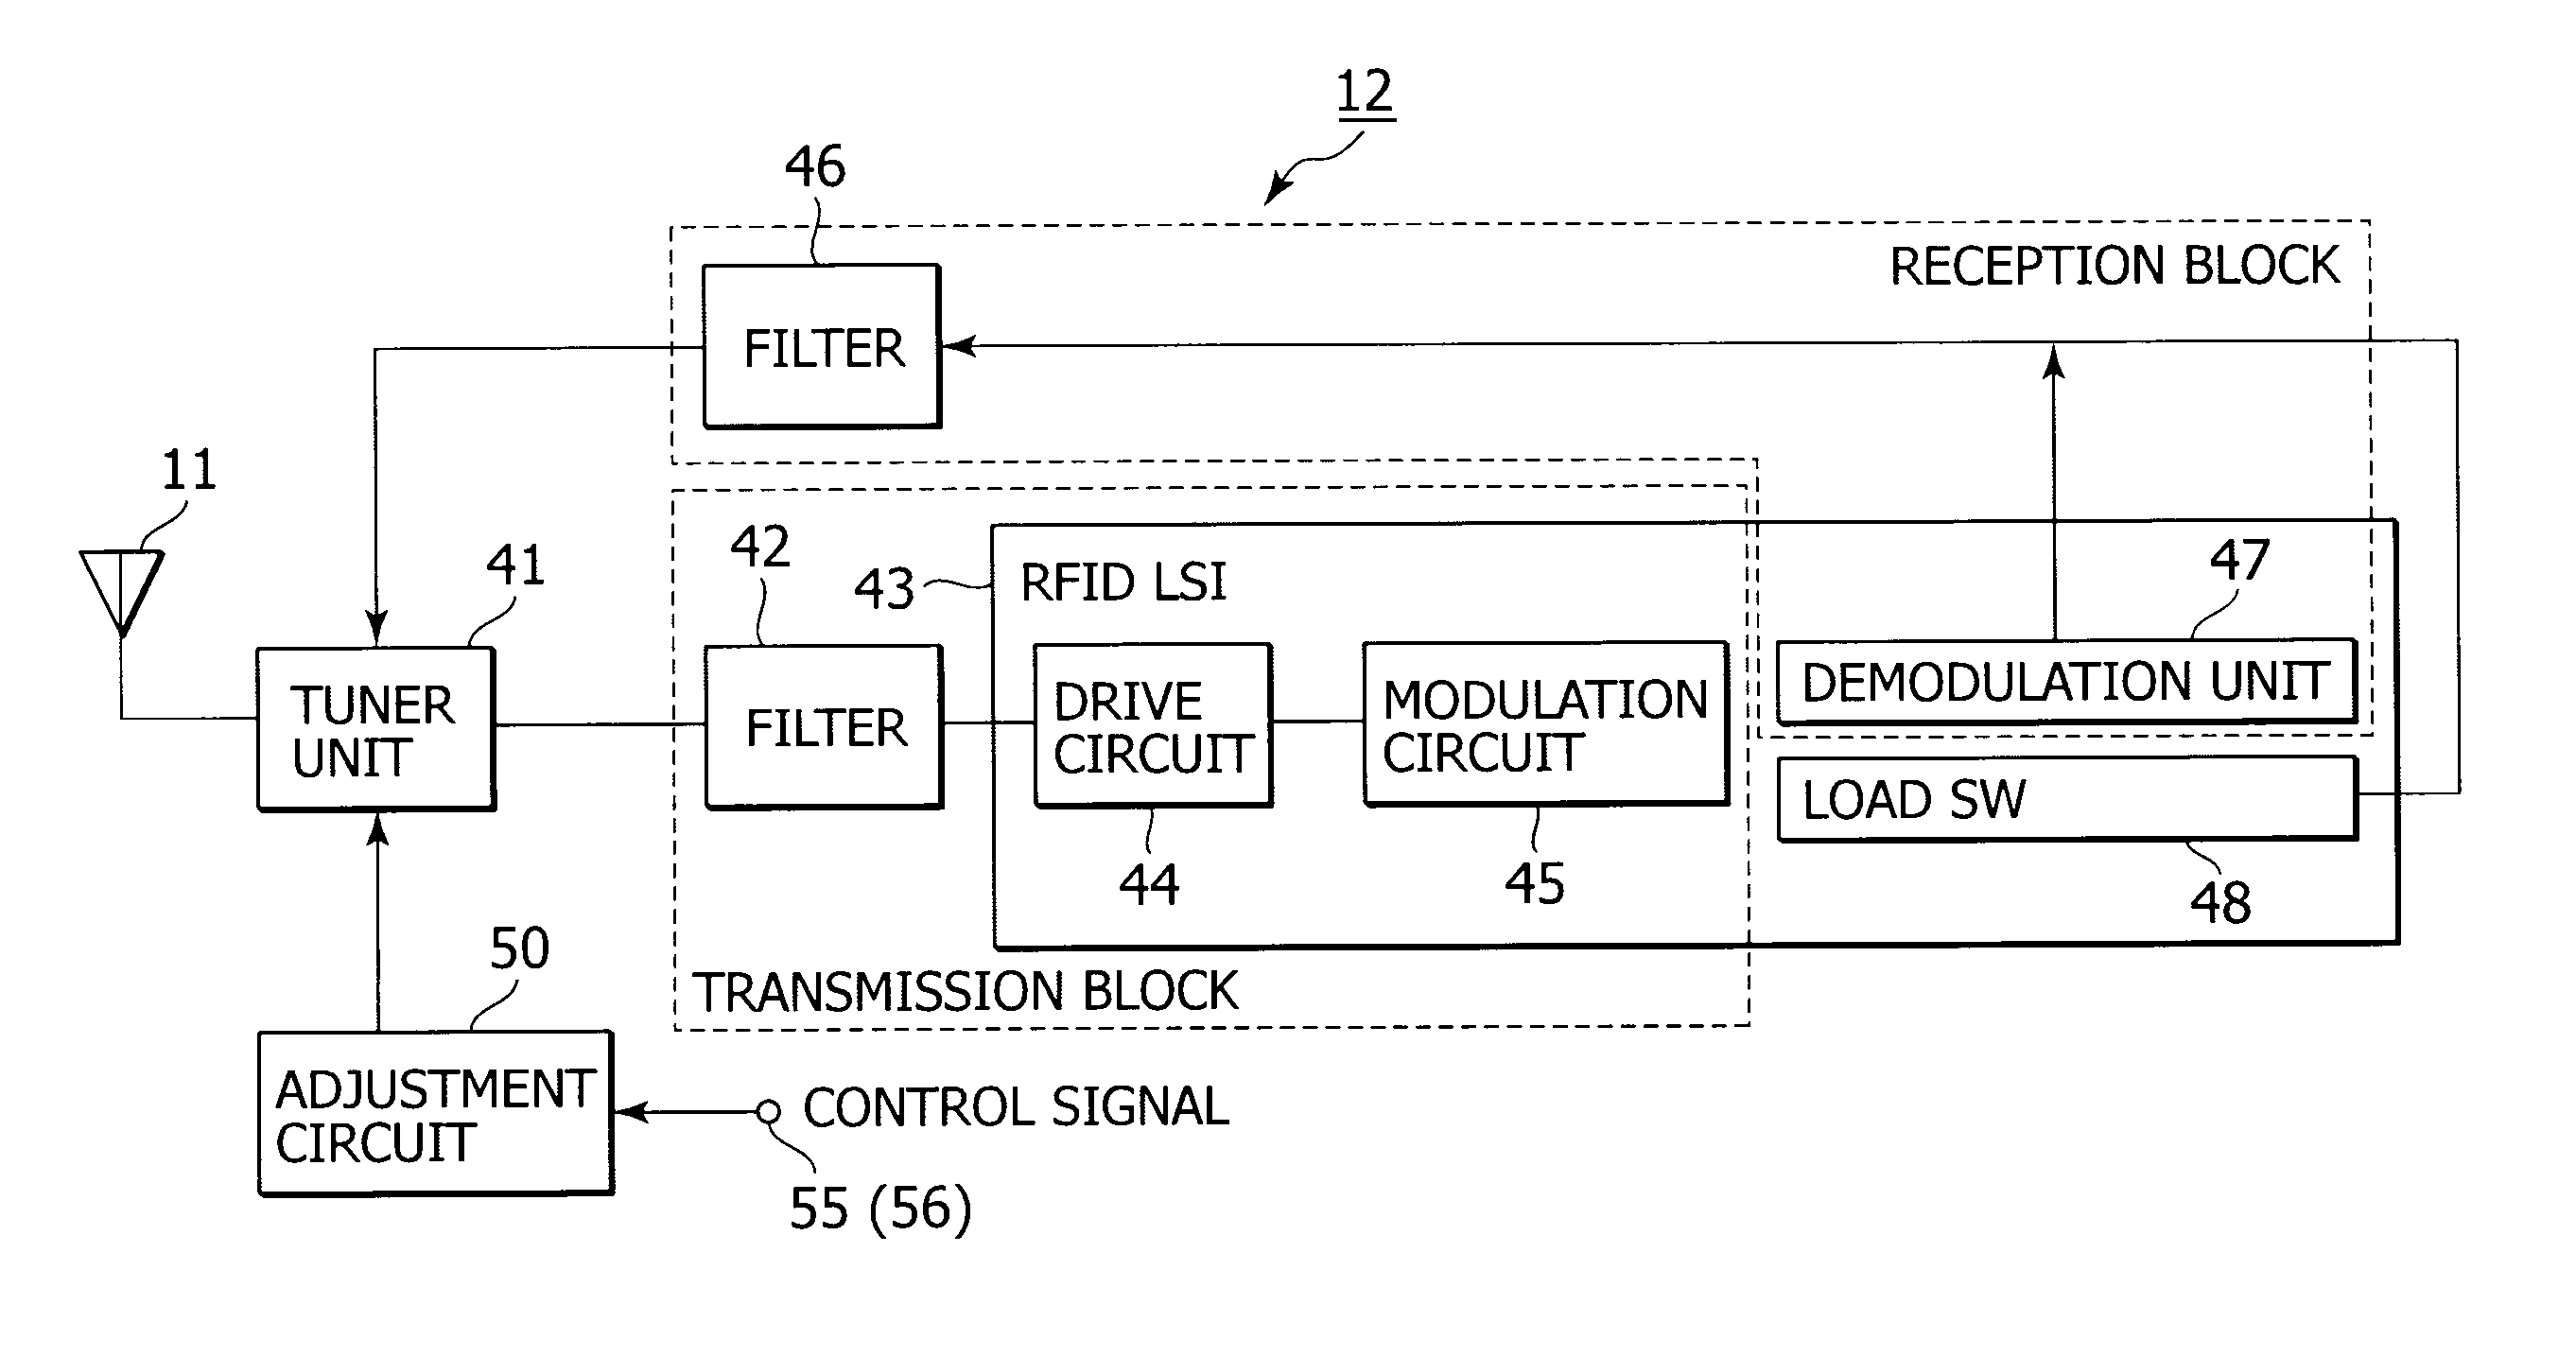 Non-contact wireless communication apparatus, method of adjusting resonance frequency of non-contact wireless communication antenna, and mobile terminal apparatus